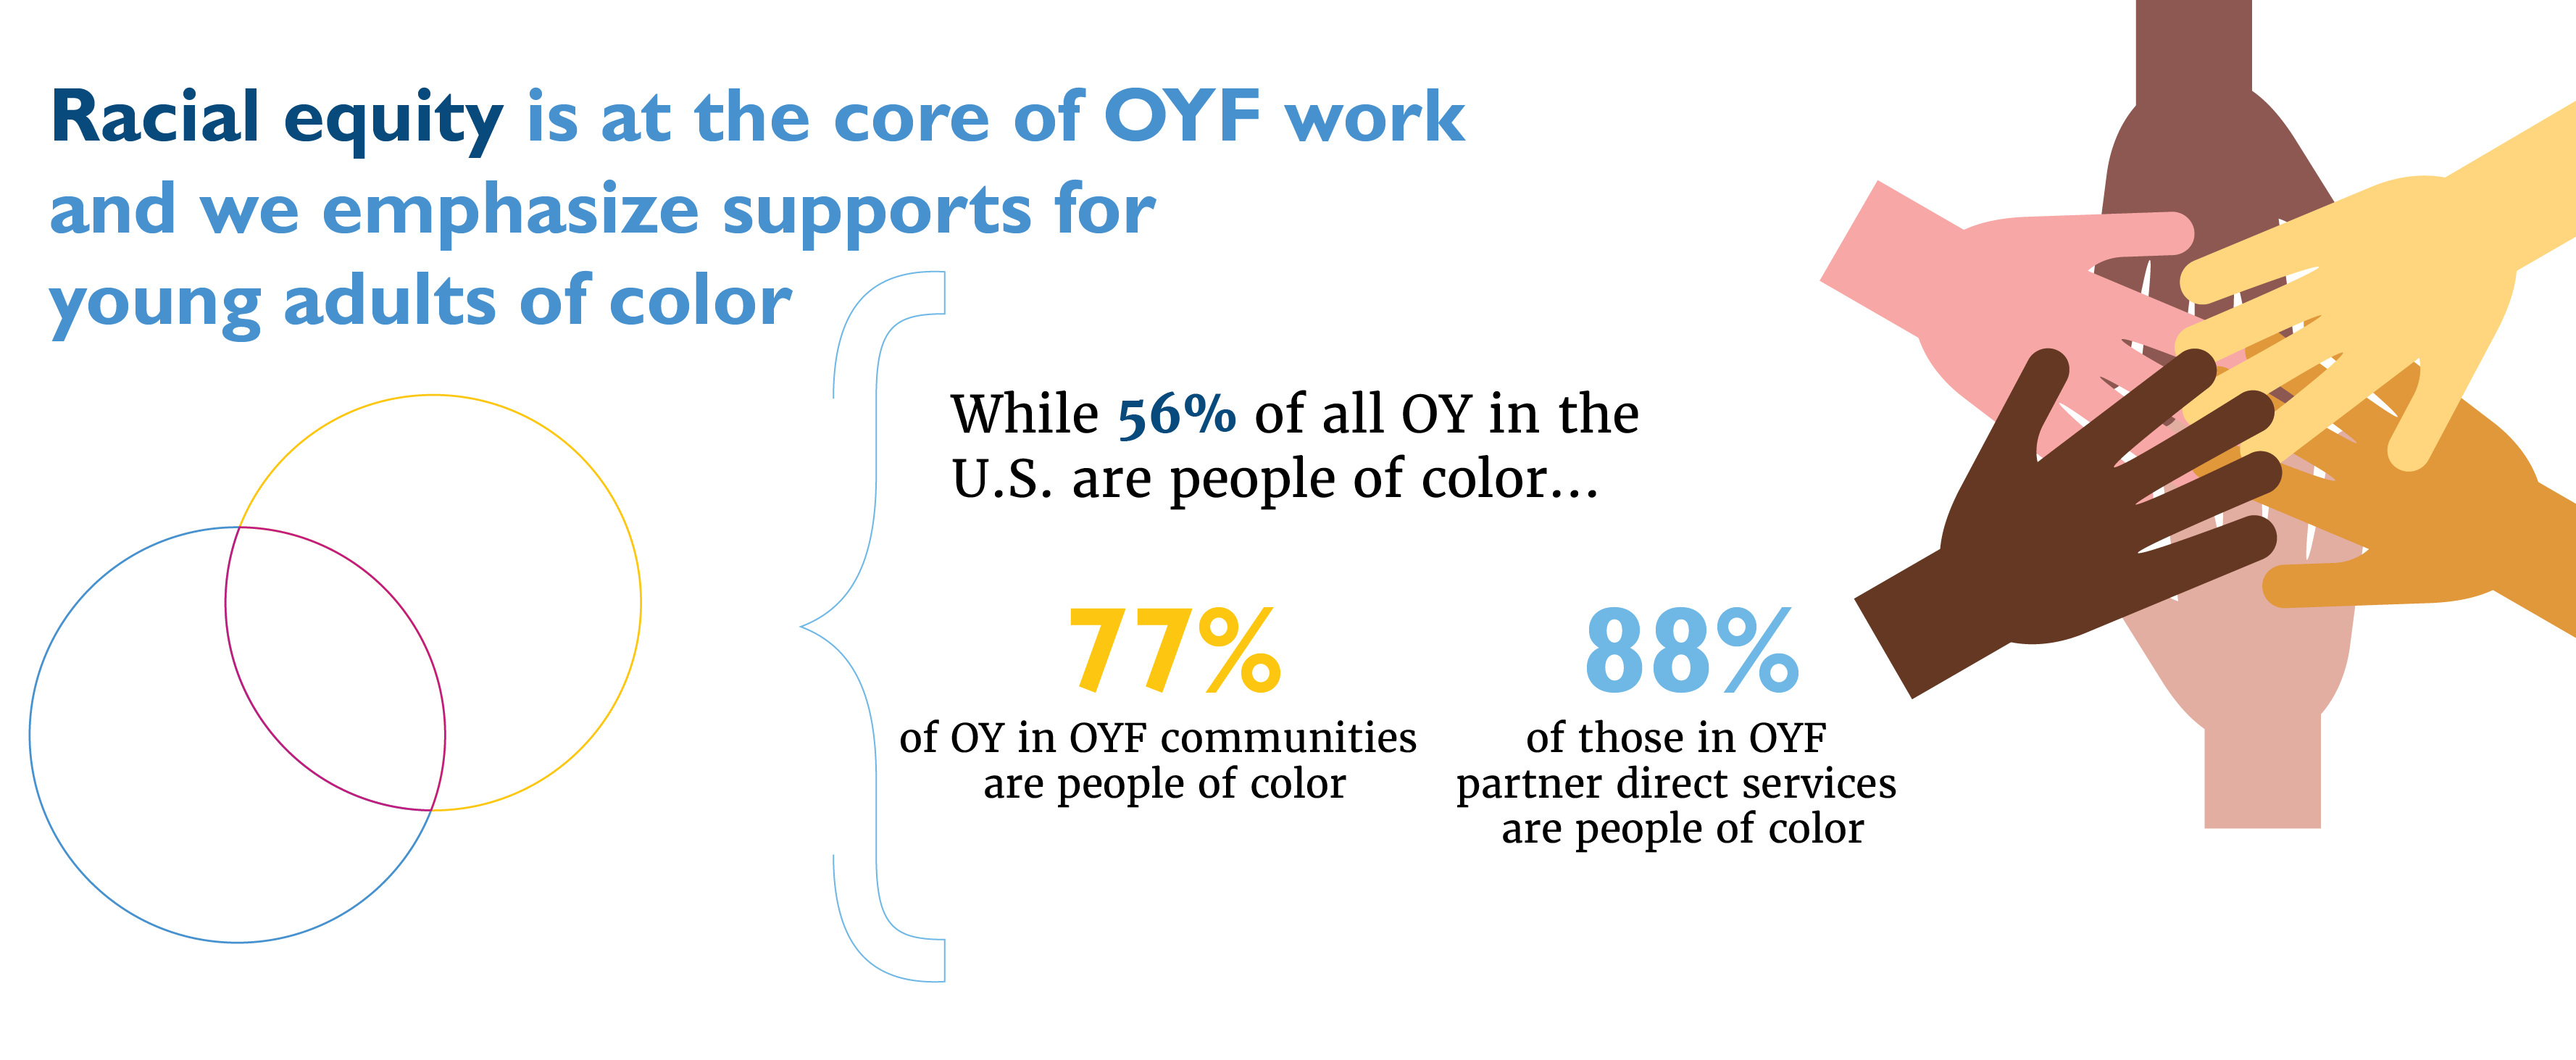 OYF focuses on youth of color